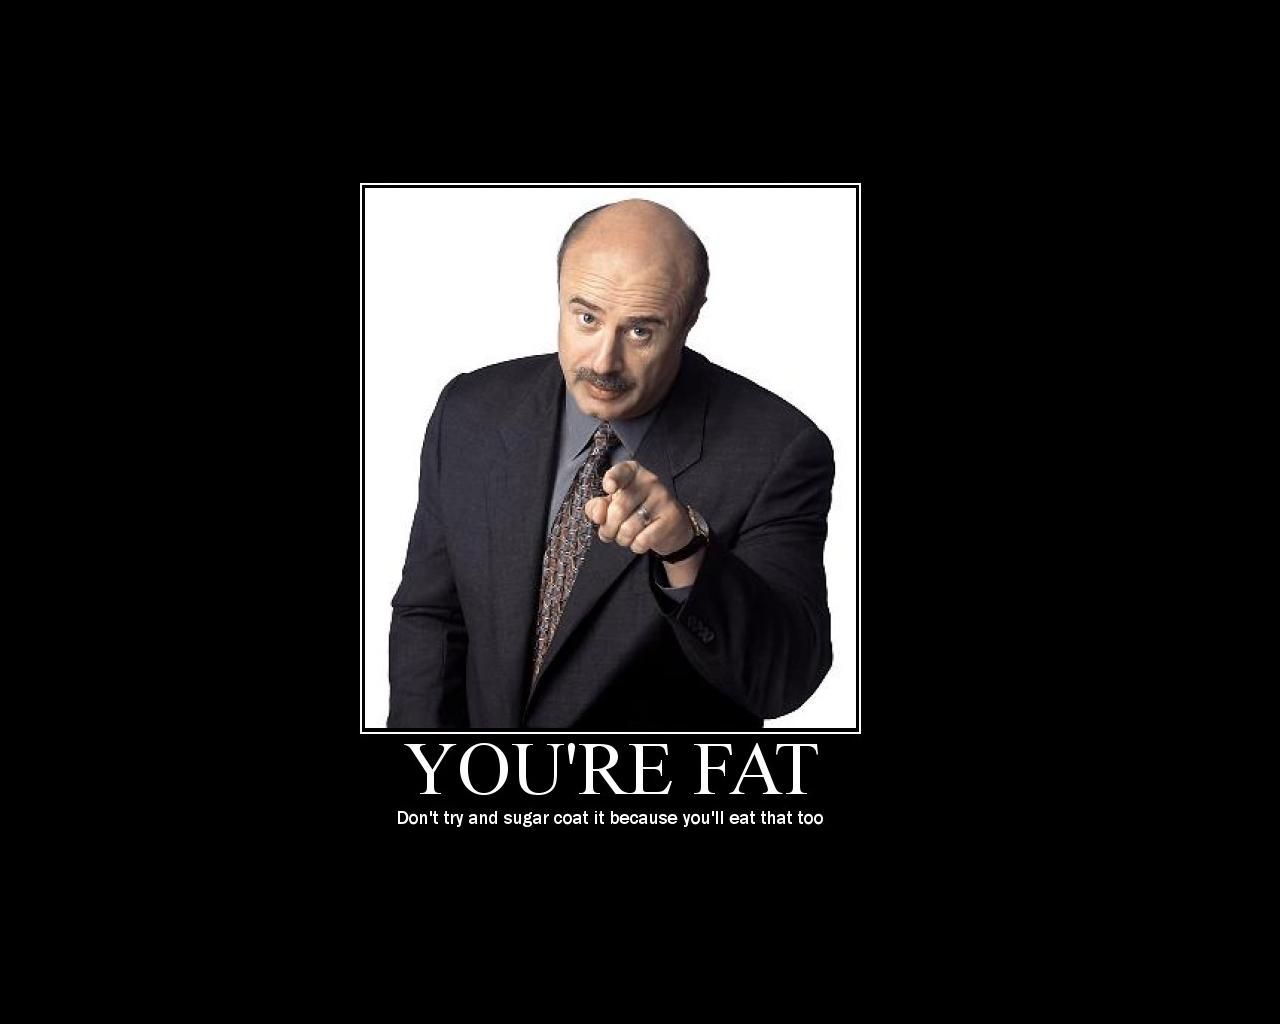 Dr phil demotivational wallpaper - (#175713) - High Quality and ...